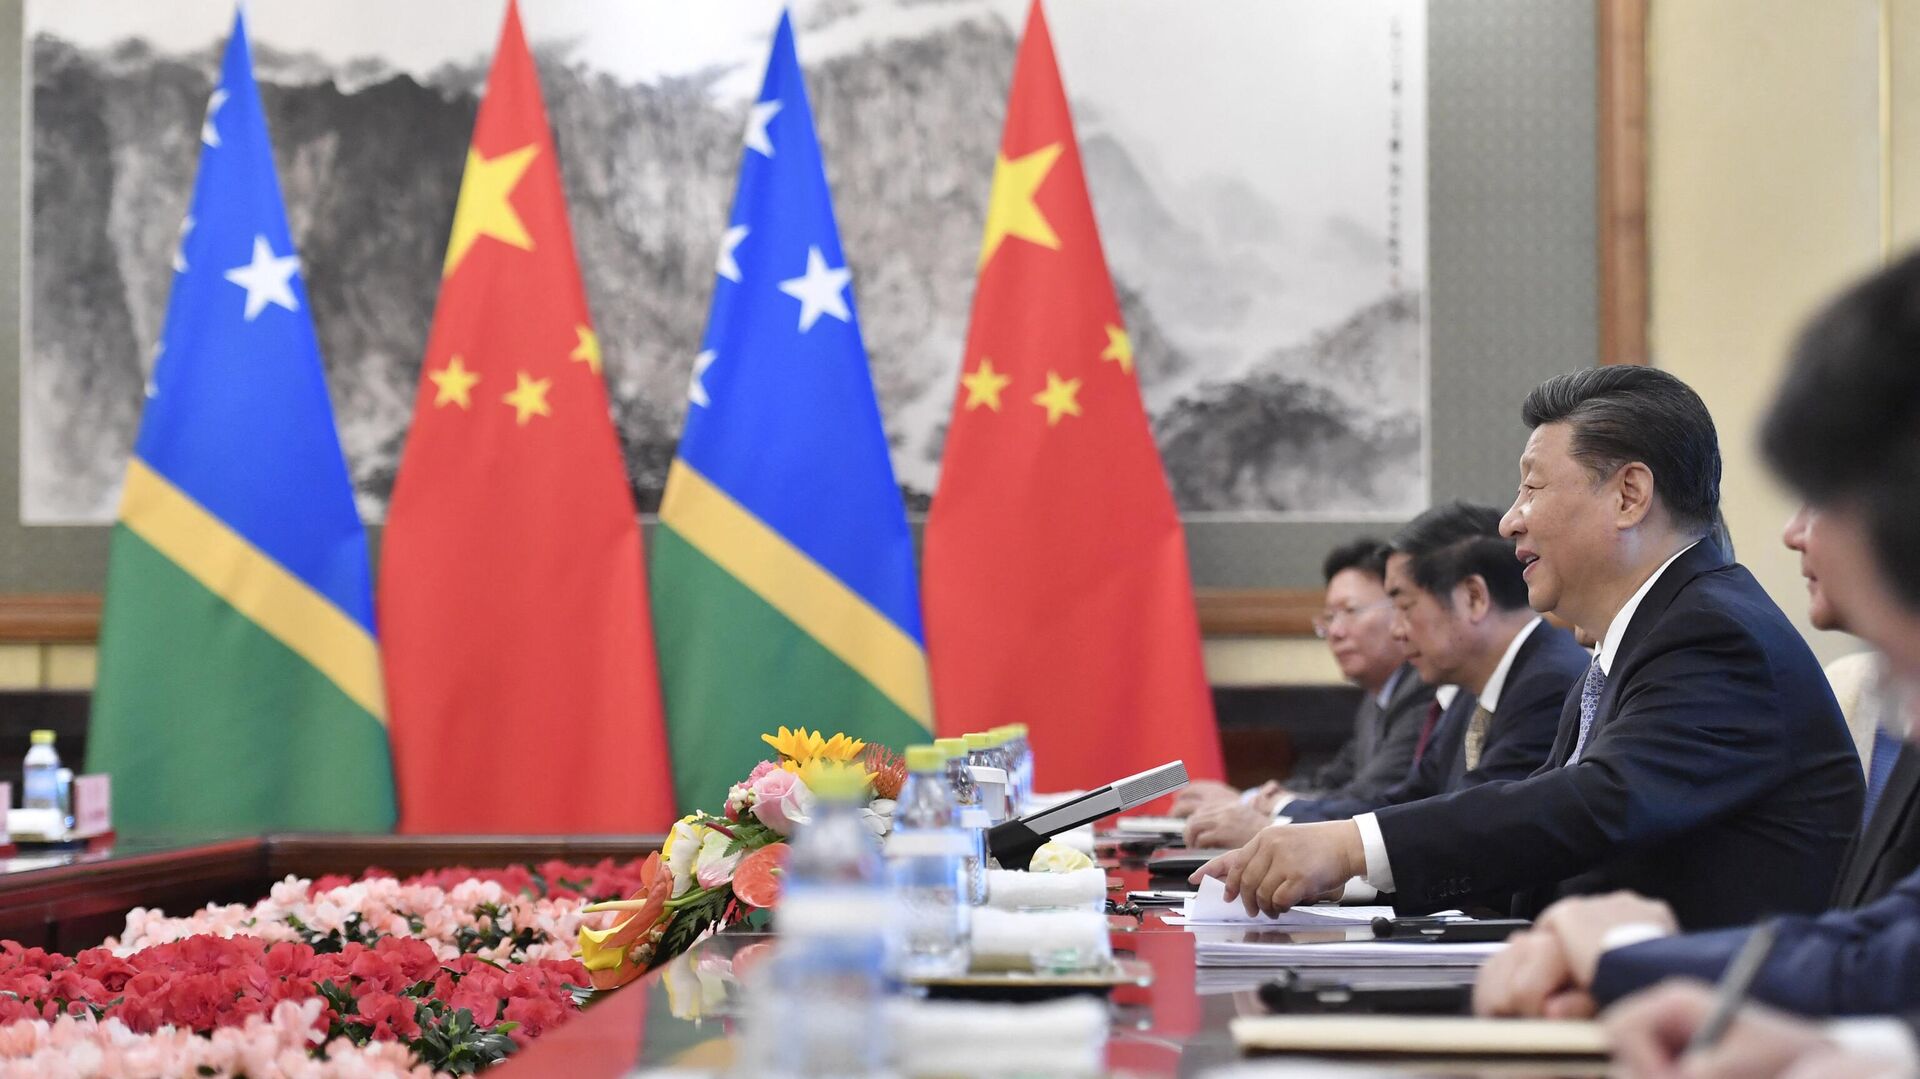 Chinese President Xi Jinping talks to Solomon Islands Prime Minister Manasseh Sogavare (not pictured) during their meeting at the Diaoyutai State Guesthouse in Beijing on October 9, 2019. (Photo by Parker Song / POOL / AFP) - Sputnik International, 1920, 19.04.2022